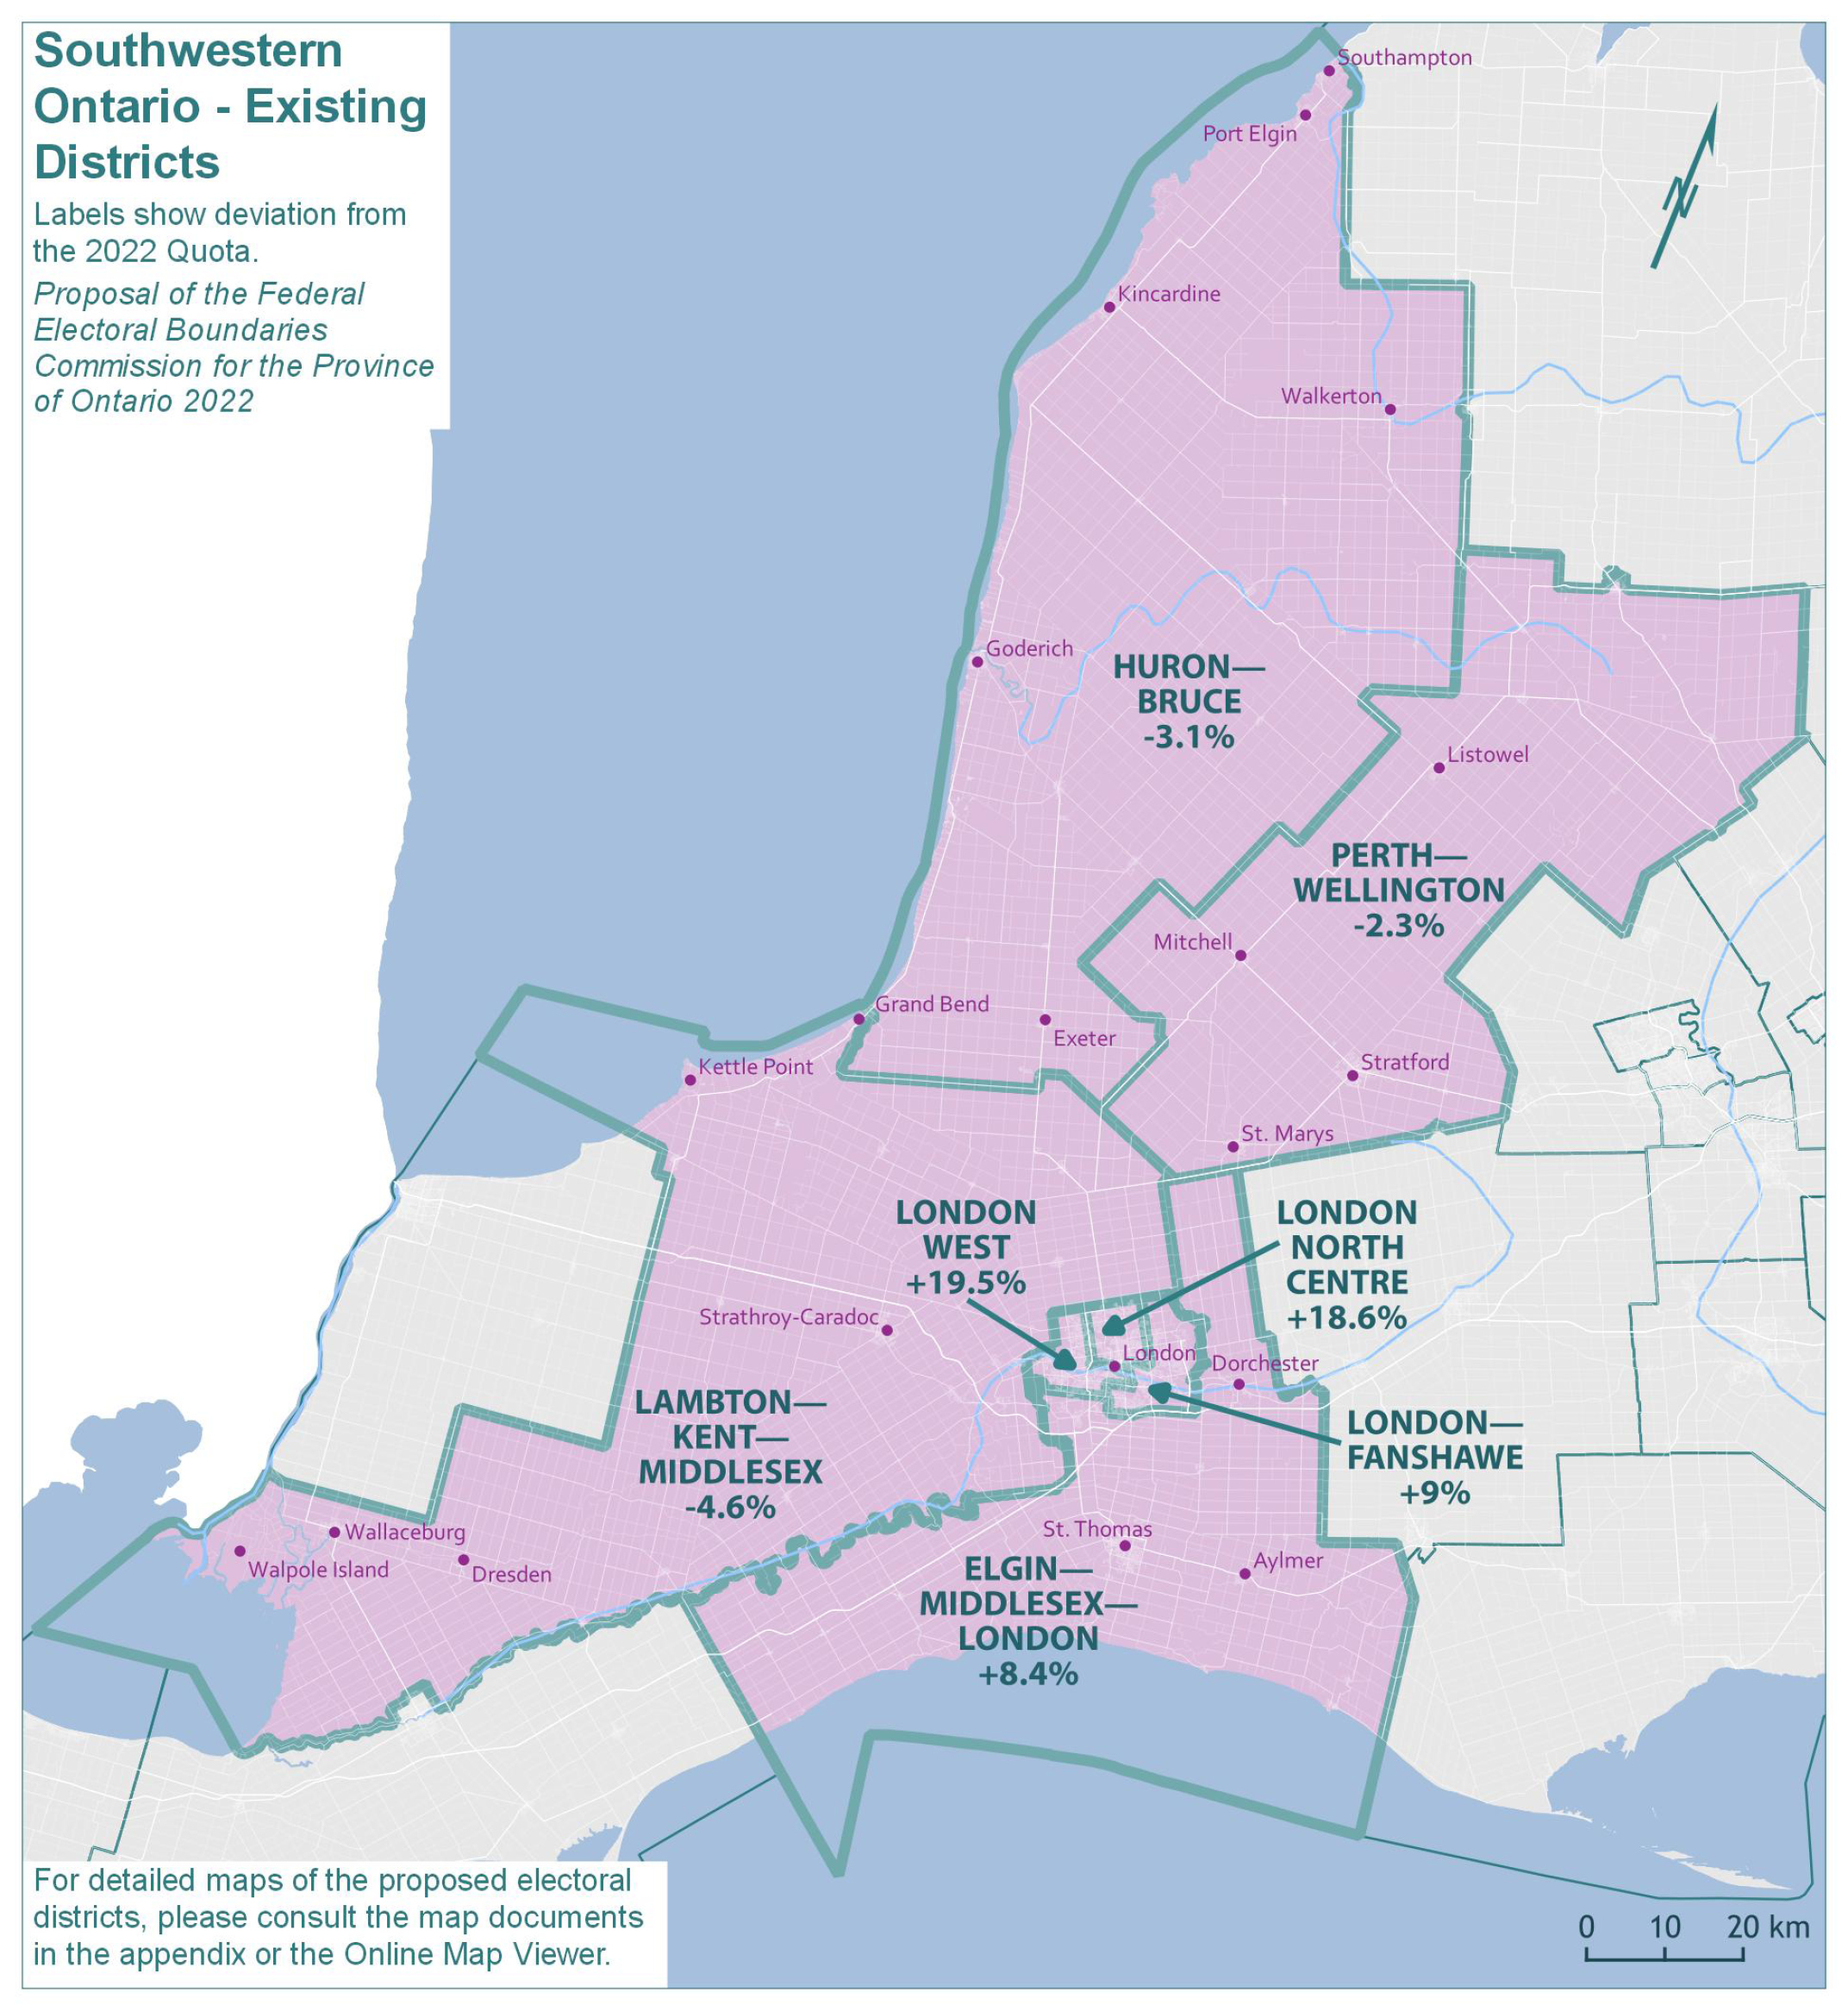 Southwestern Ontario - Existing Districts 